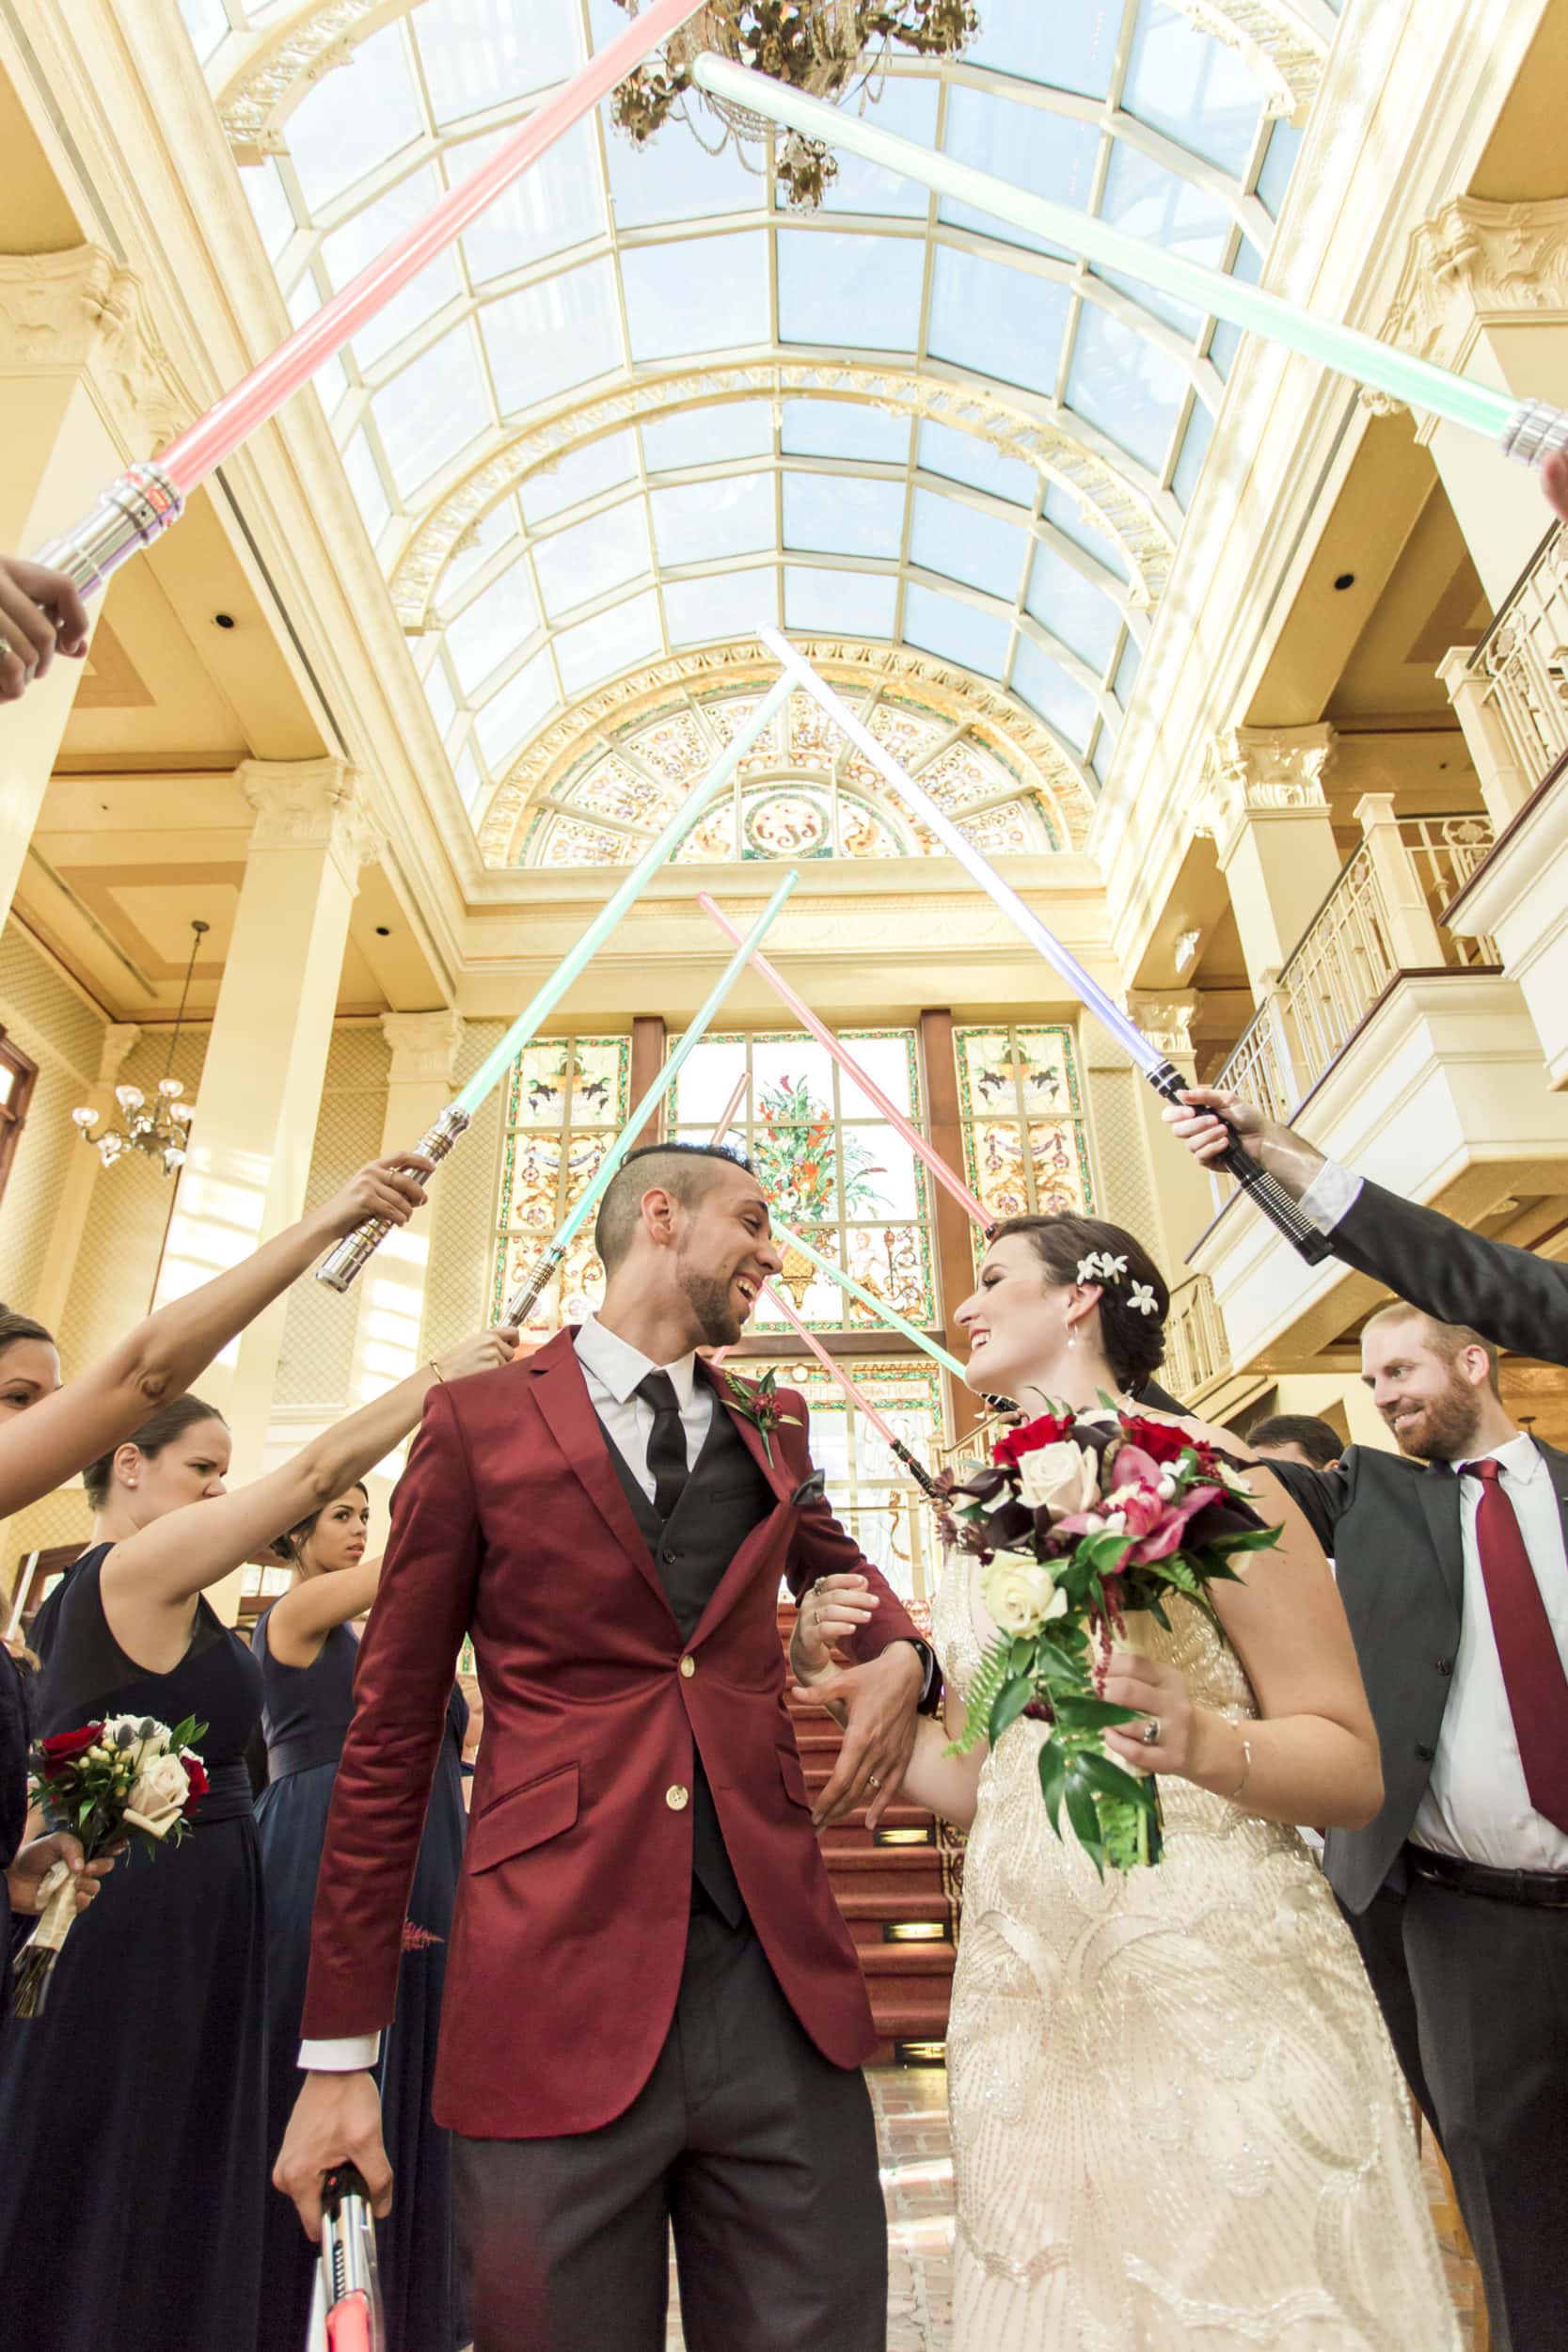 bride with white dress with red and white flowers with groom with red suit with wedding guests holding light sabers with large glass window ceiling in background at Star Wars Wedding